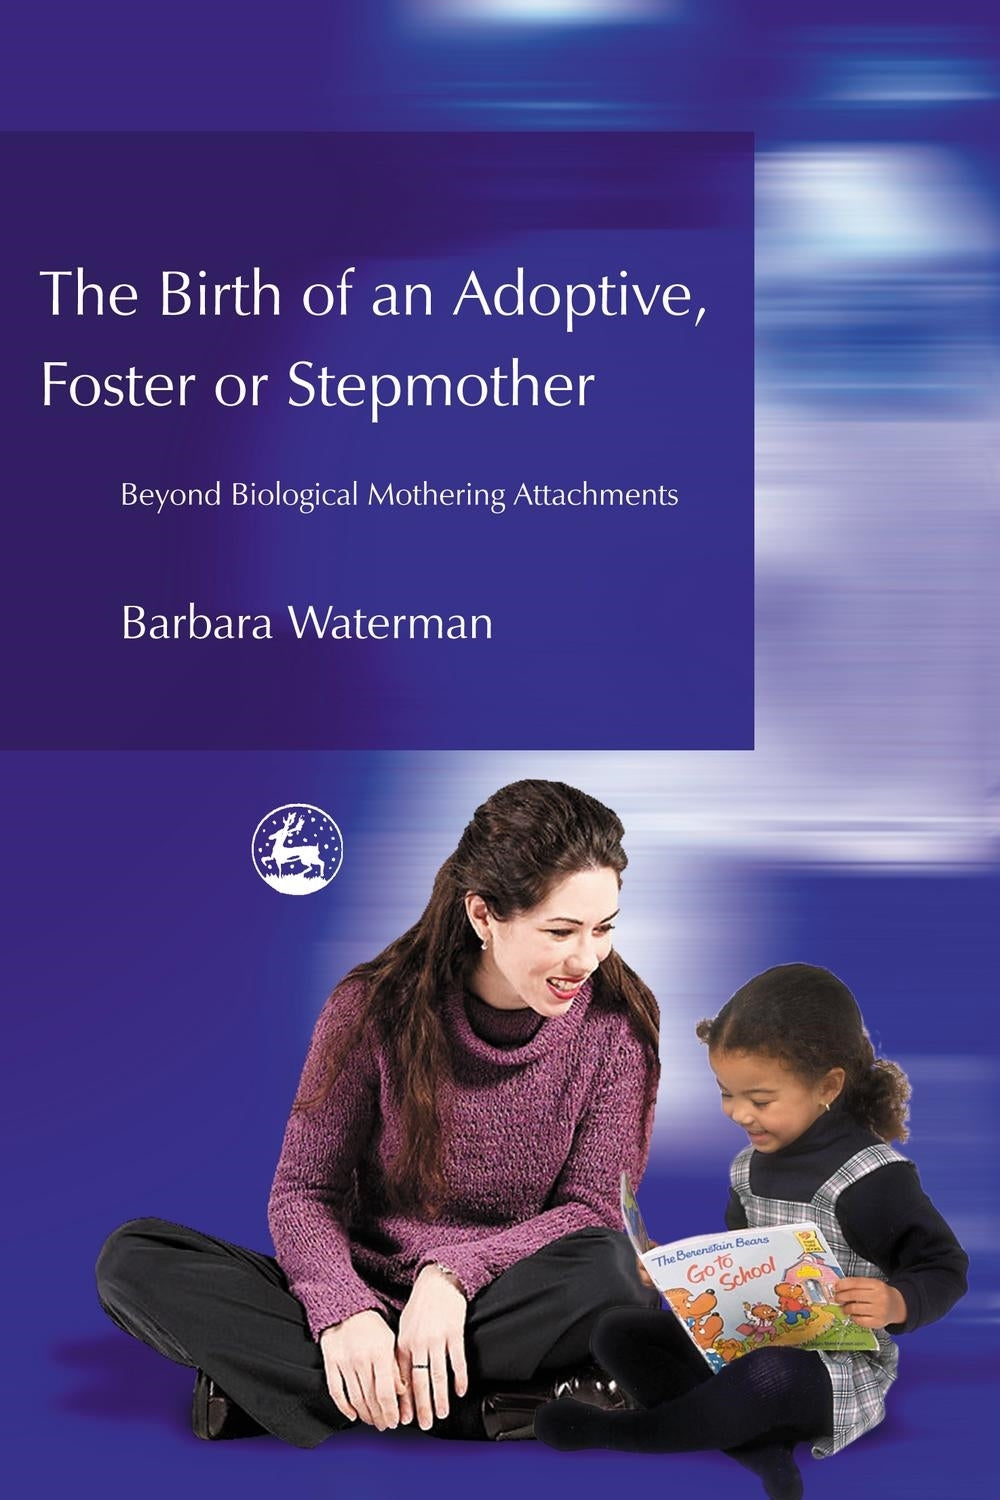 Birth of an Adoptive, Foster or Stepmother by Barbara Waterman